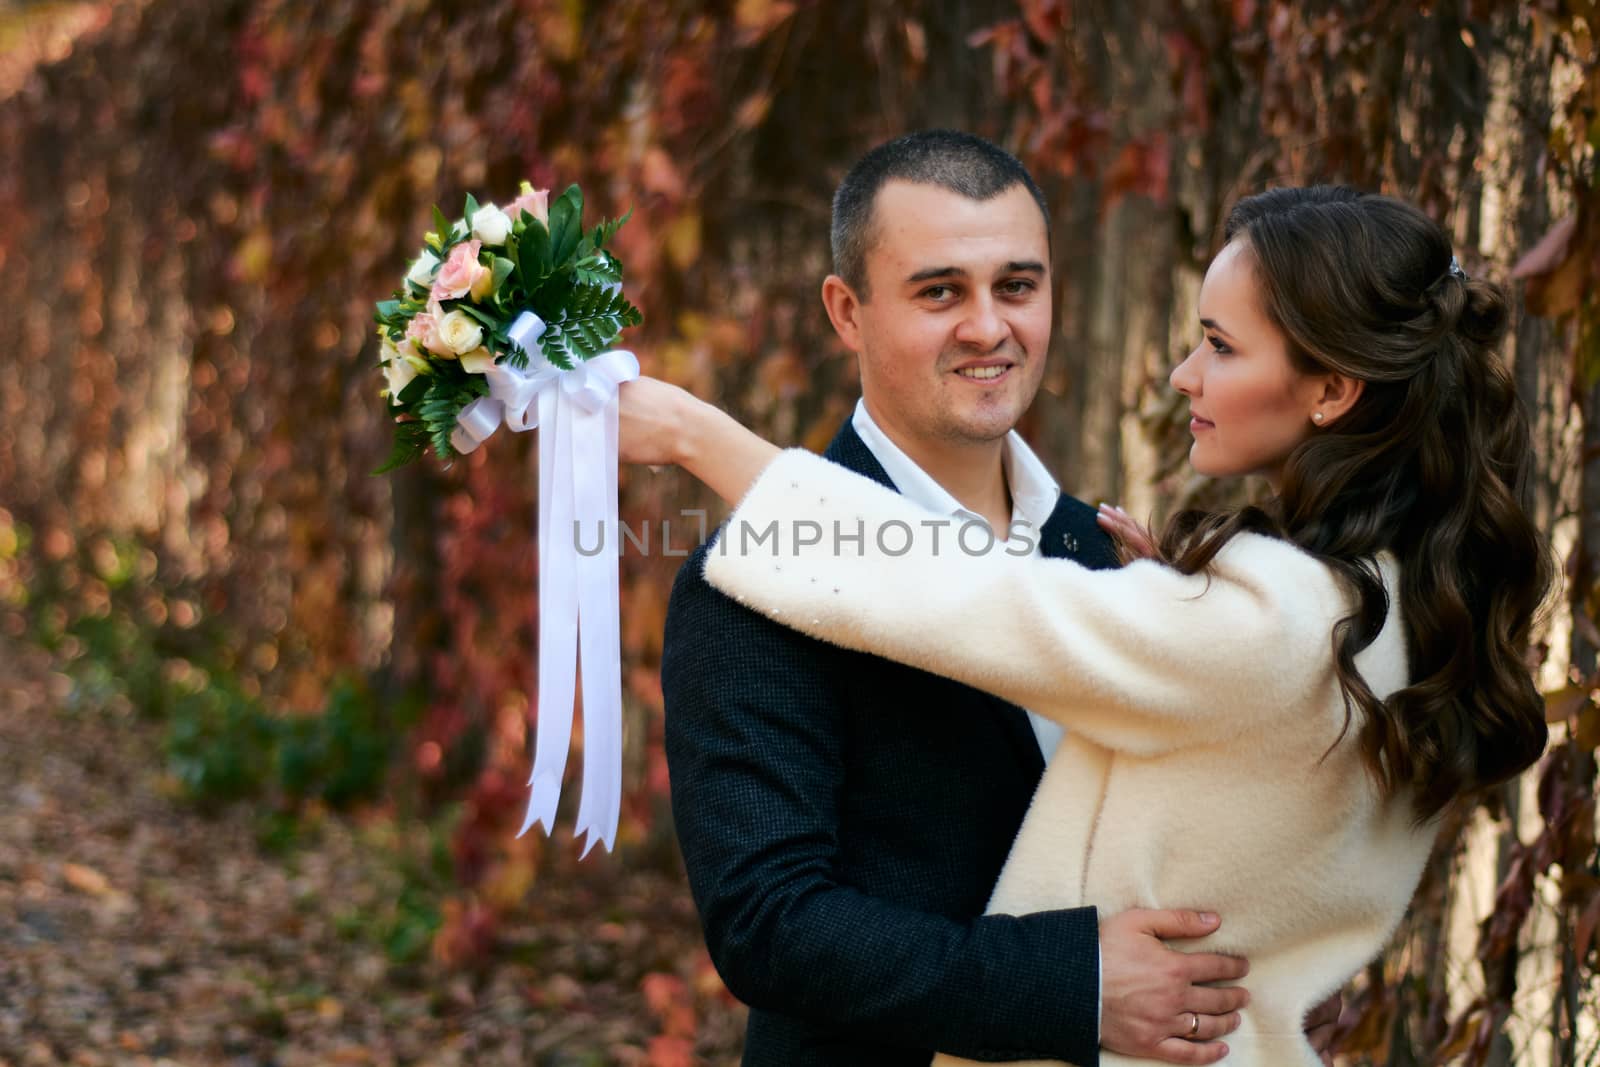 Couple in love close-up portrait. Young male and woman just married. Concept of happy family. Modern family outdoor. Adorable family demonstrate love and care. Autumn vacation.